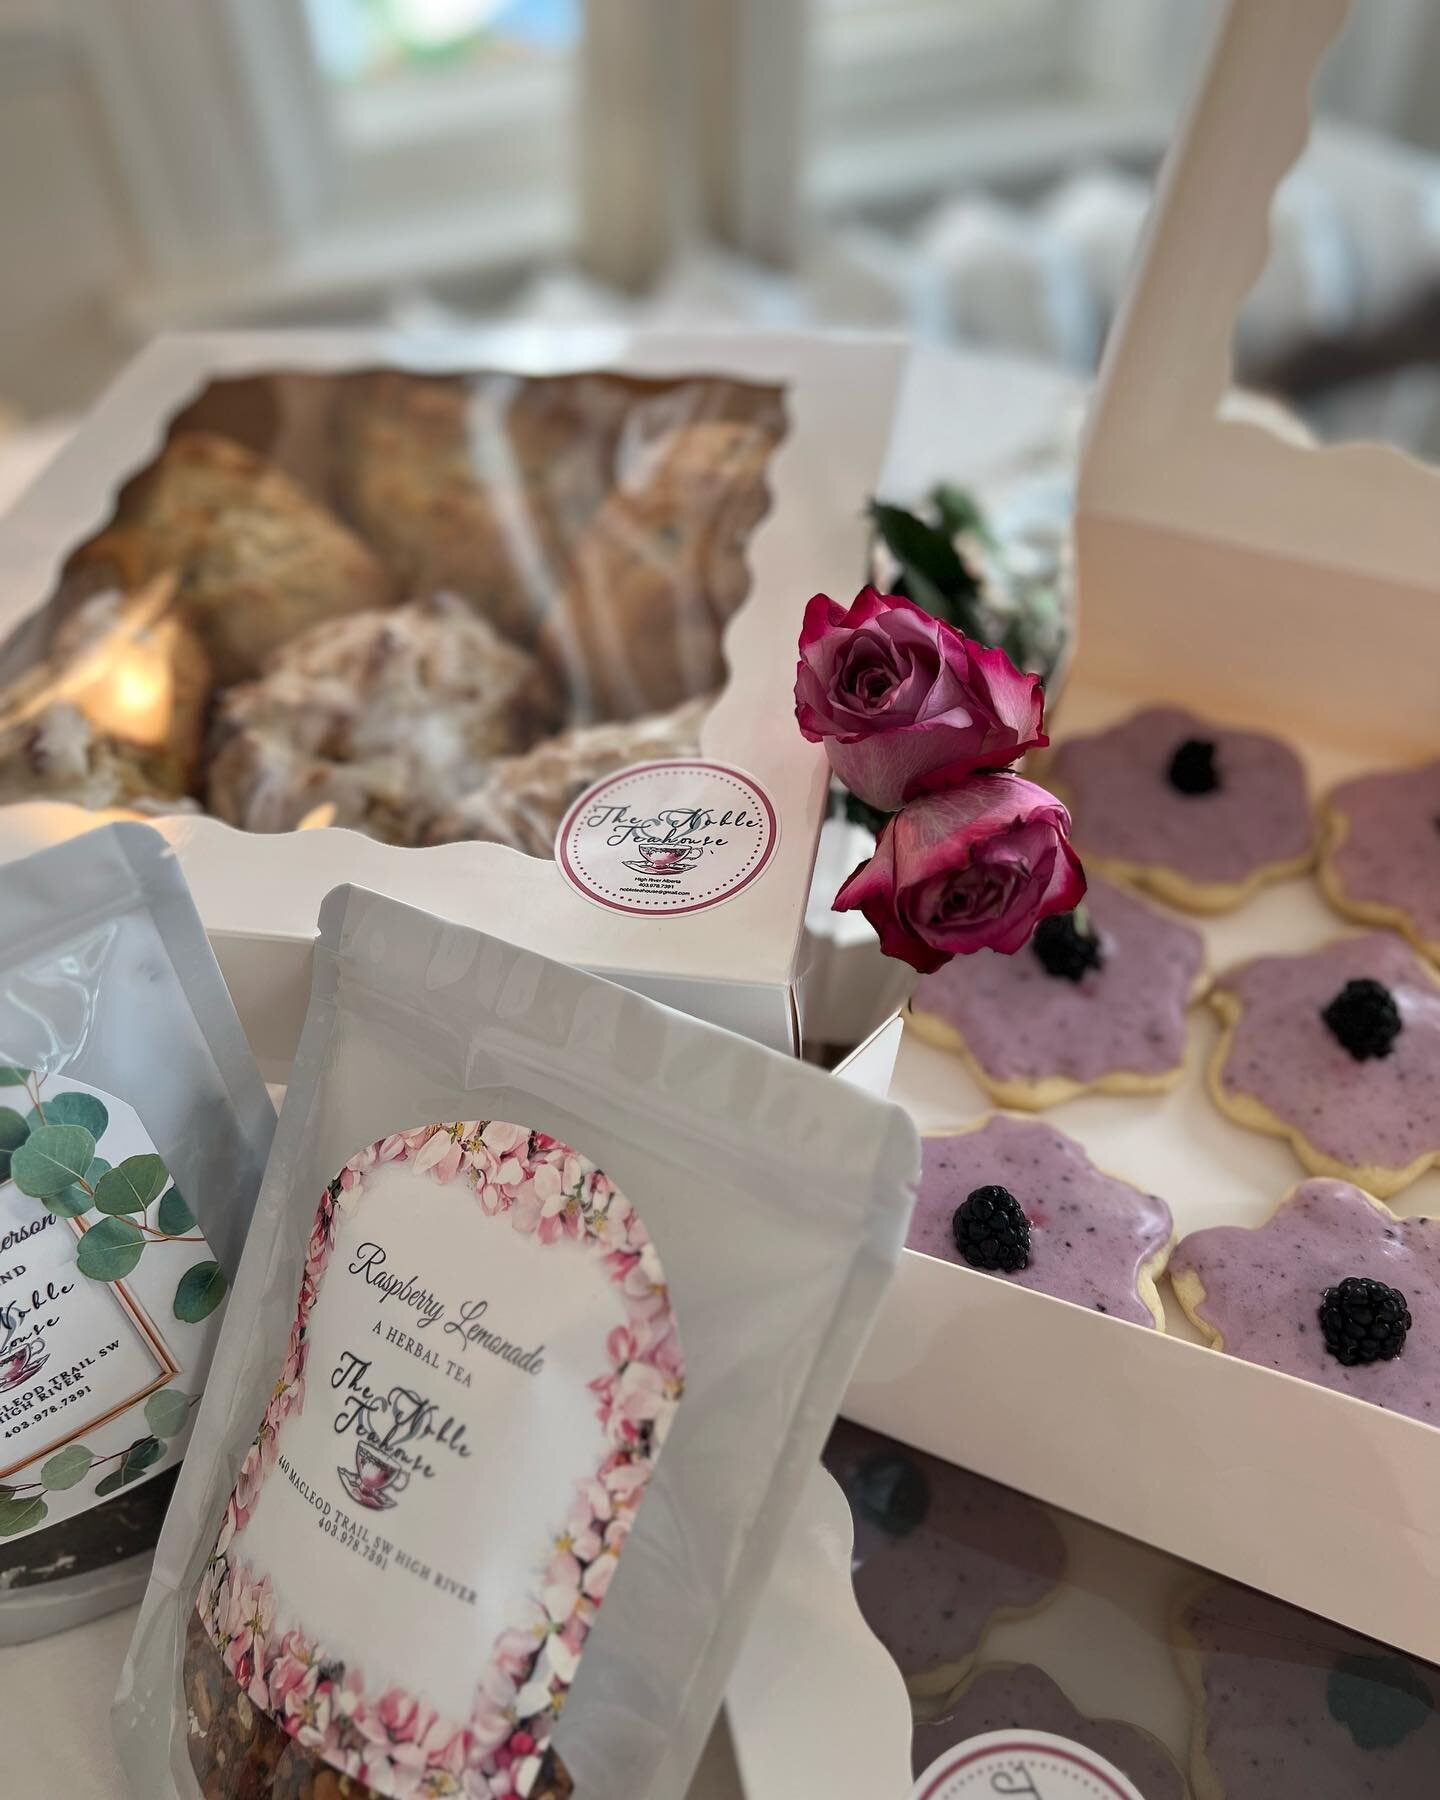 Take away treats! 💕🌸💕🌸
It&rsquo;s always a good idea to text in your orders in advance so you don&rsquo;t miss out on our fresh offerings every week!! 🌸403-978-7391

#treatstogo #weekendvibes #teatime